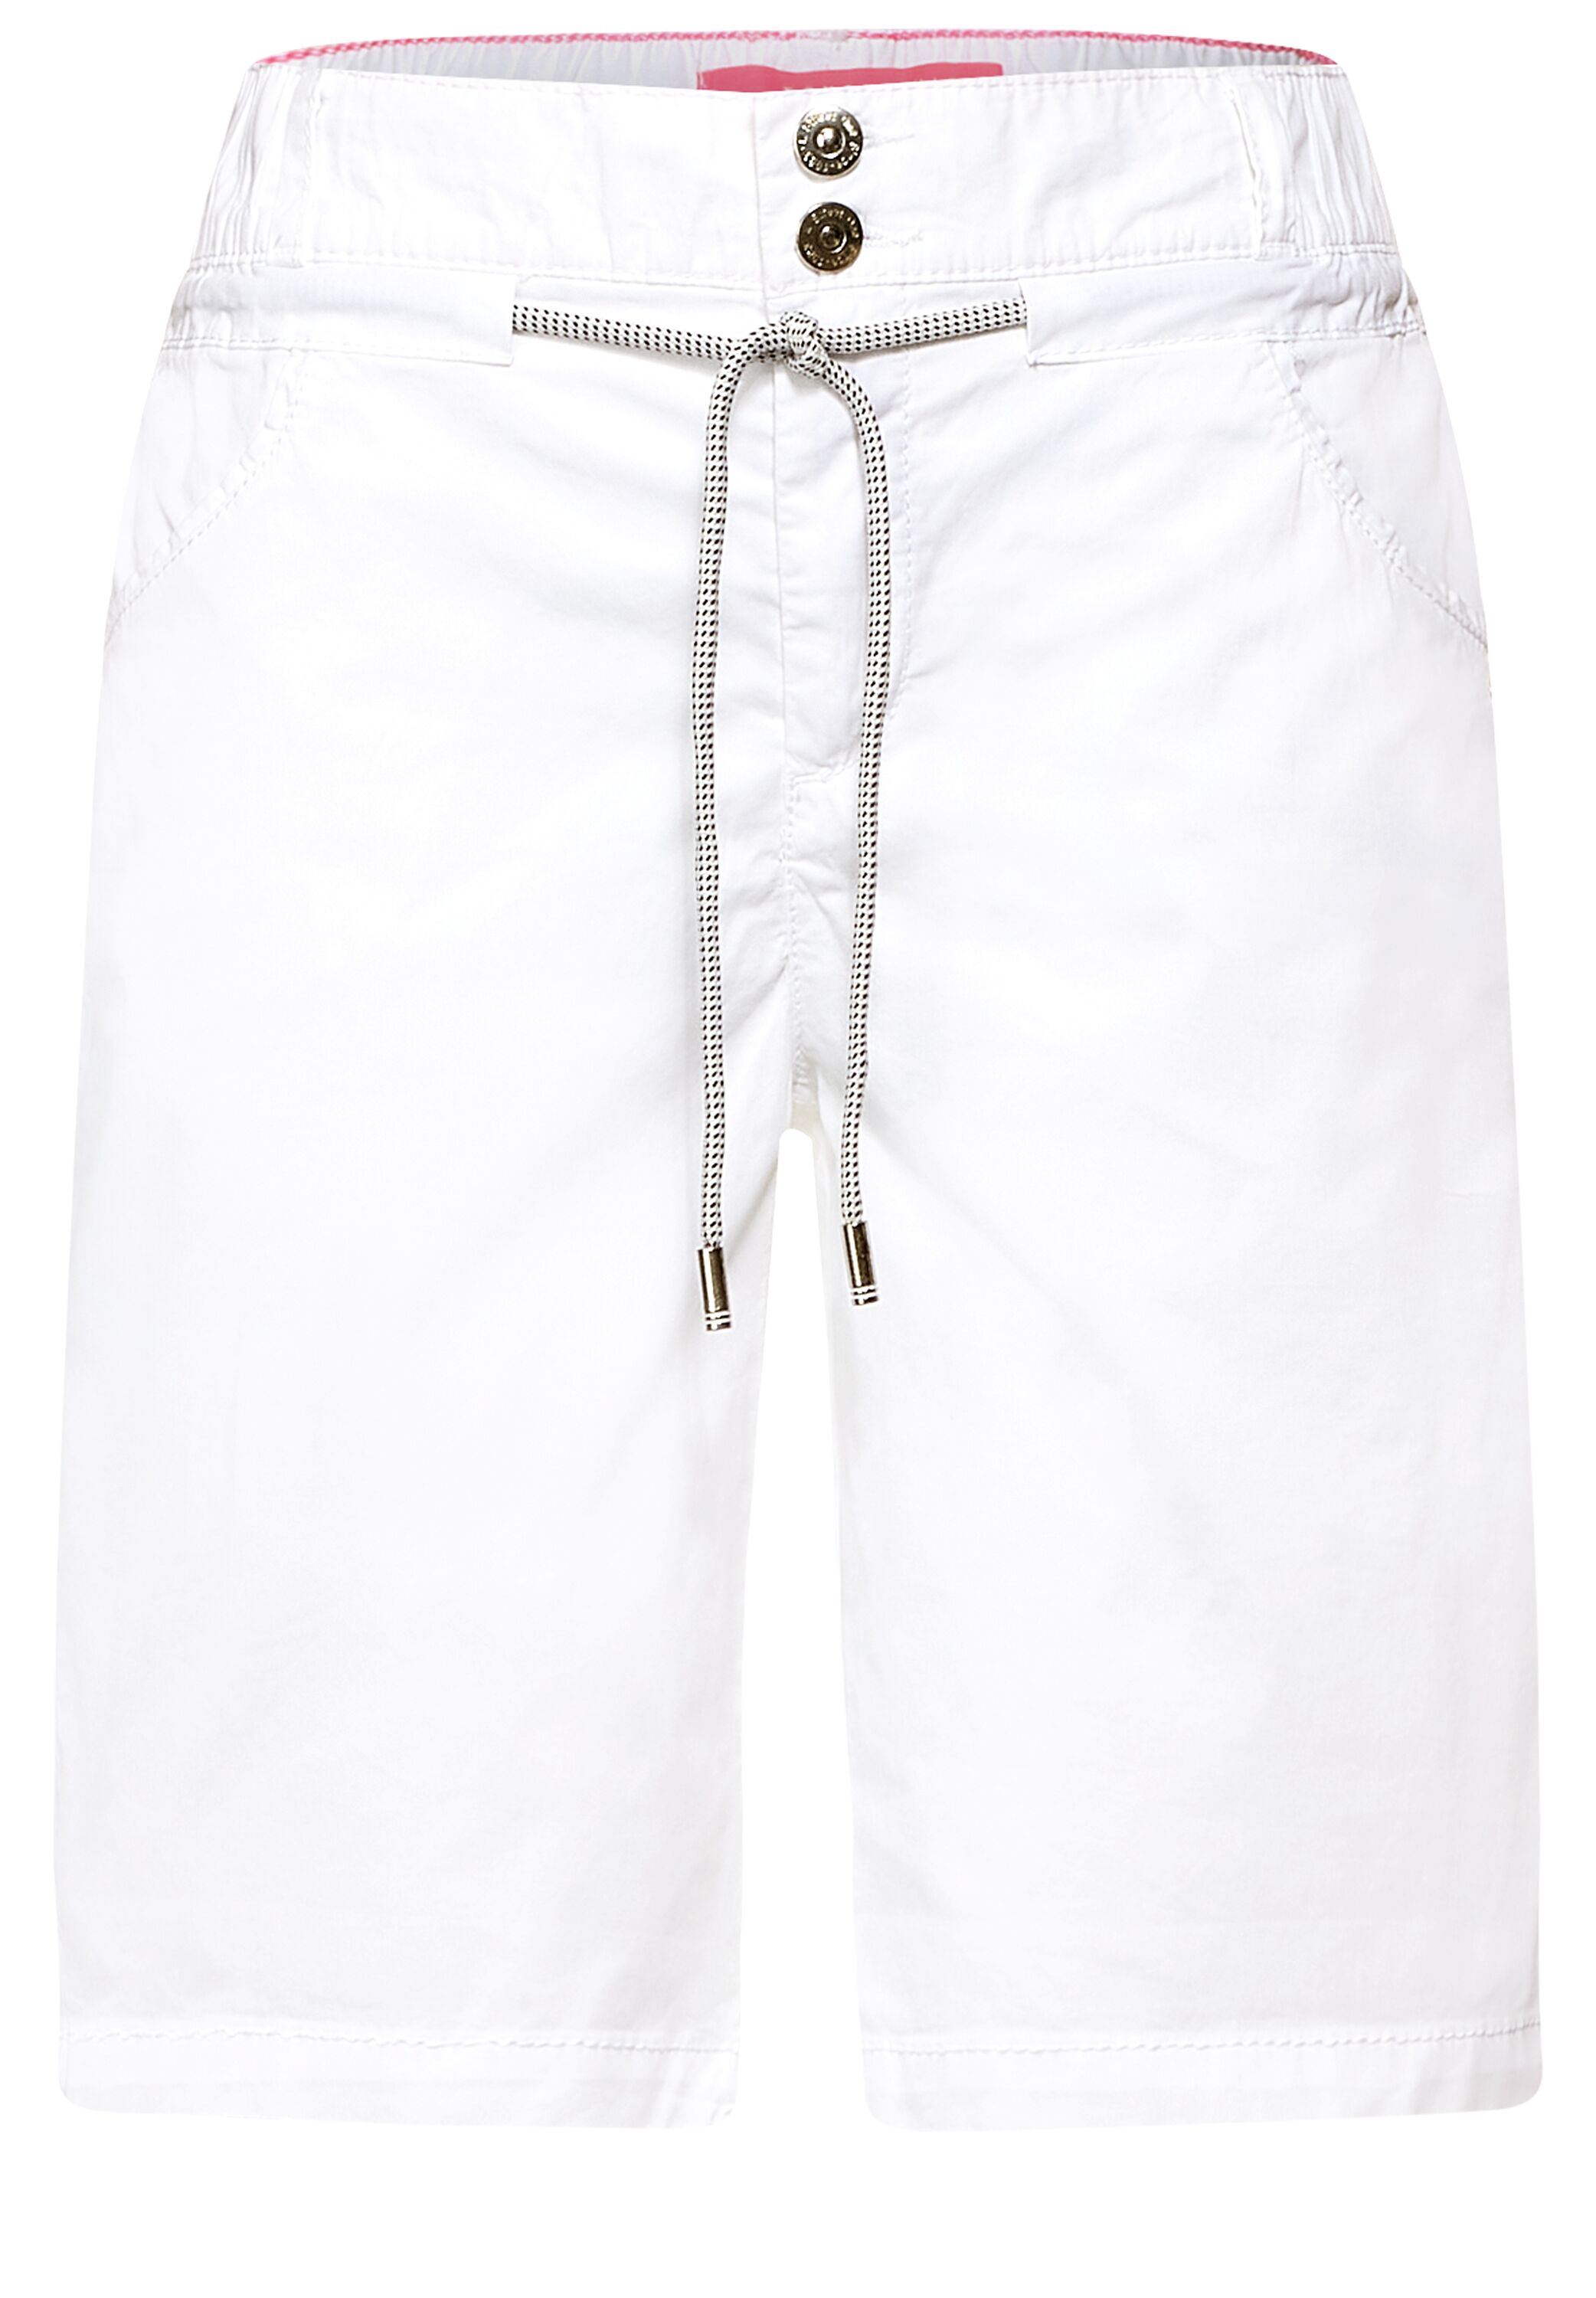 Street One Shorts Bonny in White im SALE reduziert A374224-10000 - CONCEPT  Mode